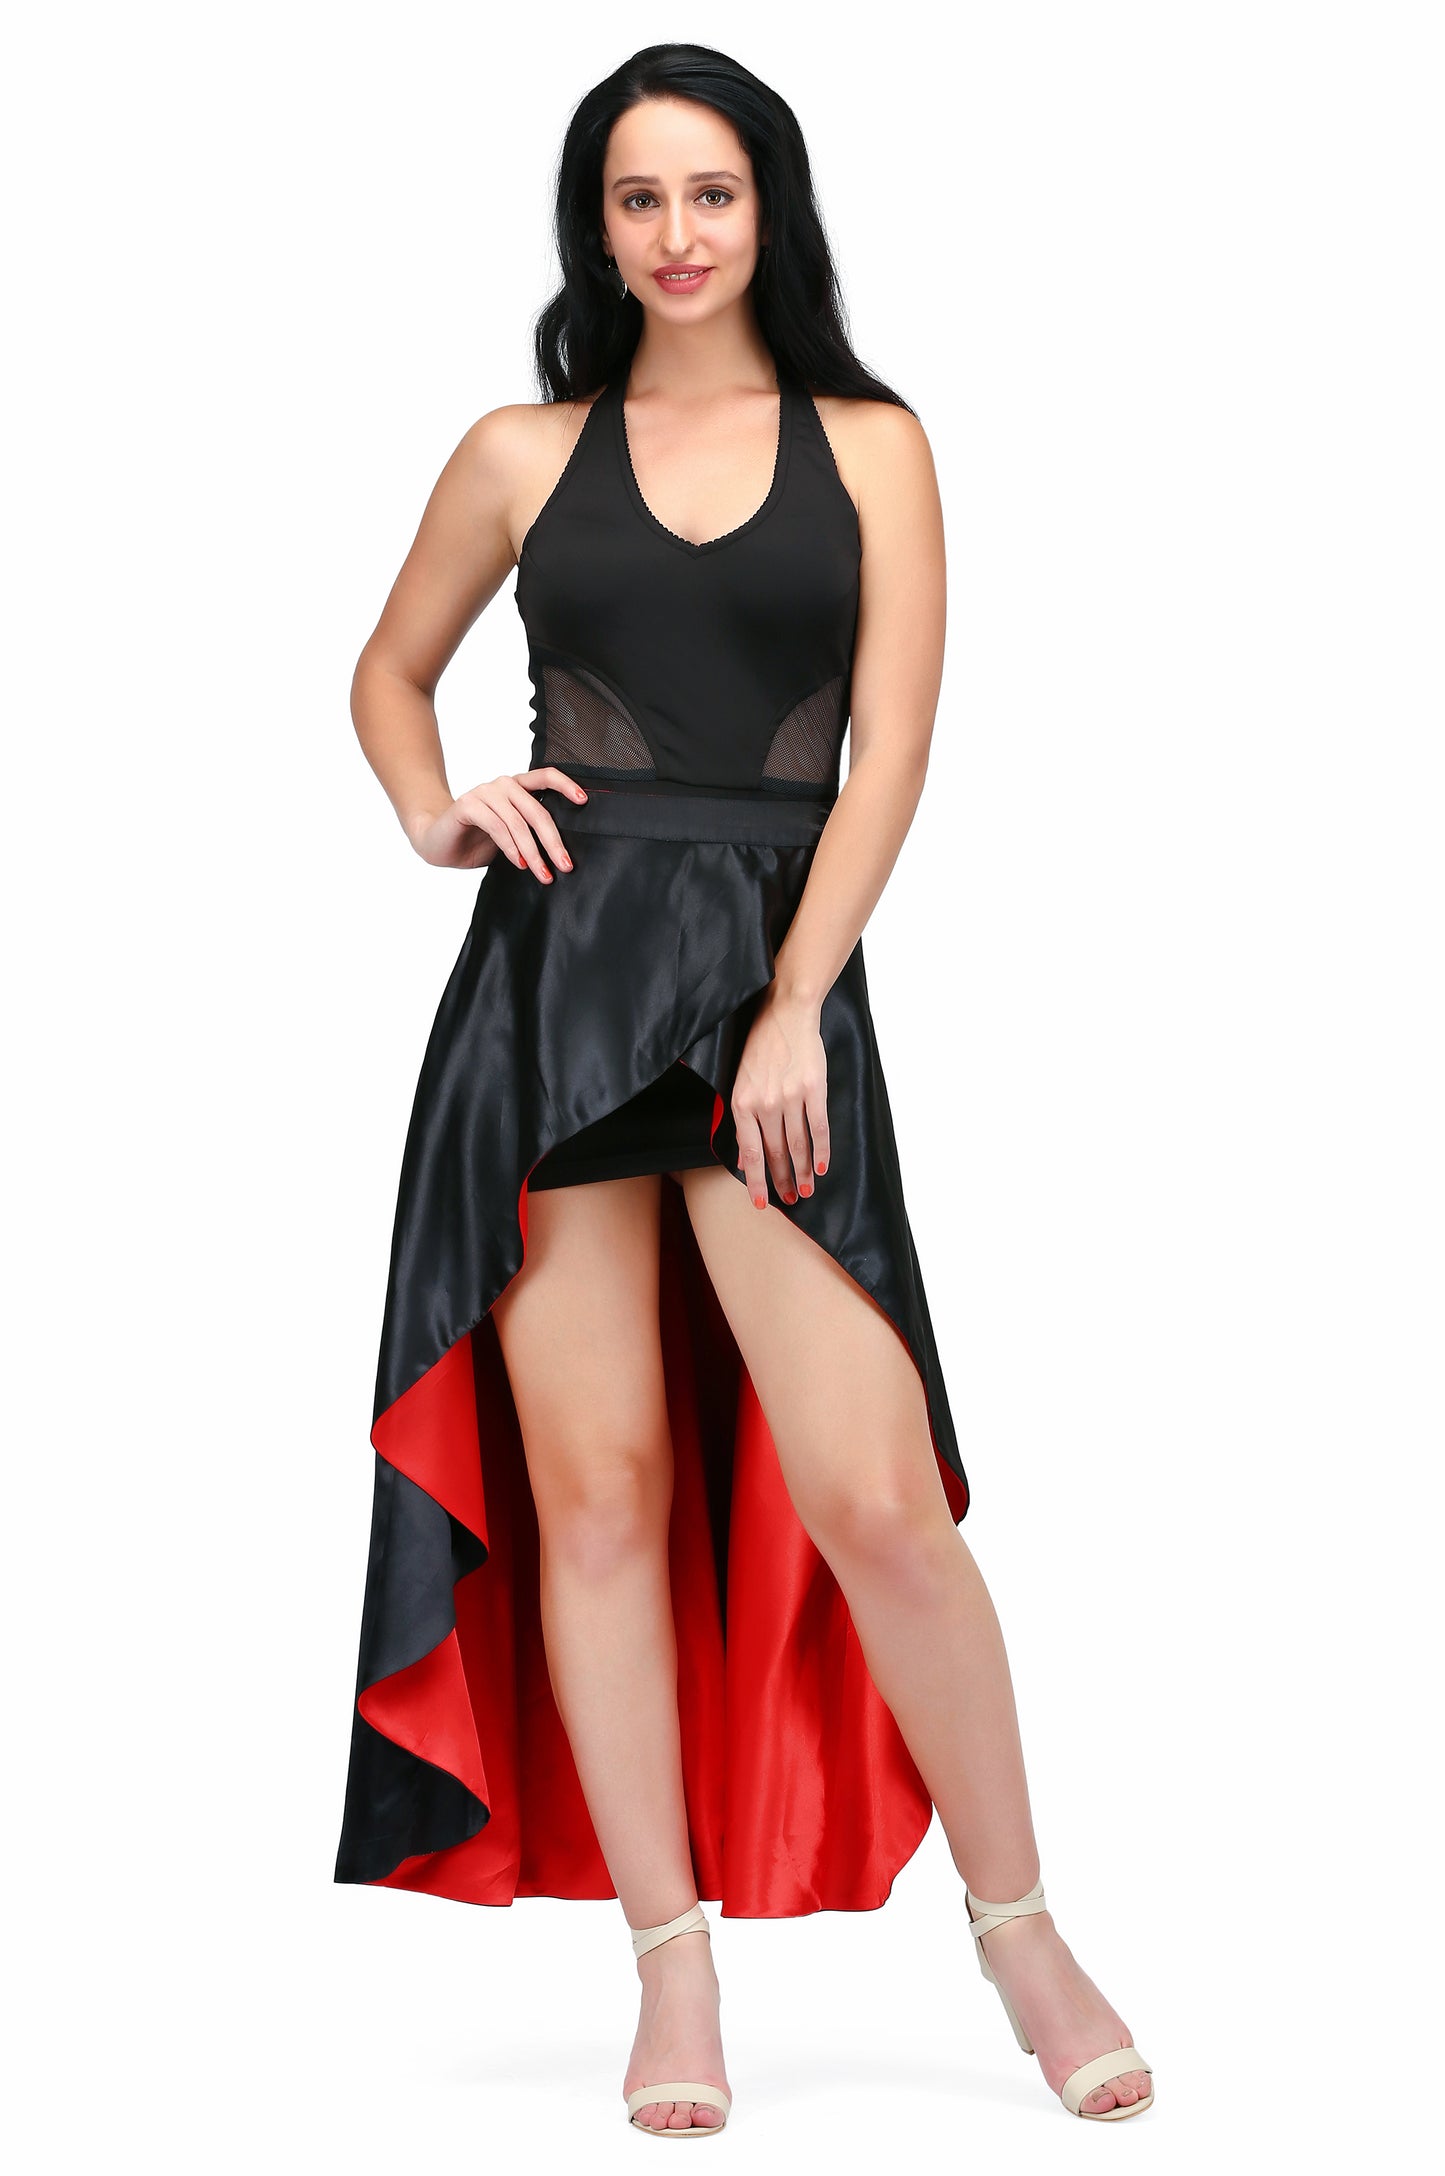 long reversible and overlaped skirt in red and black fabric combined with the black fitted dress